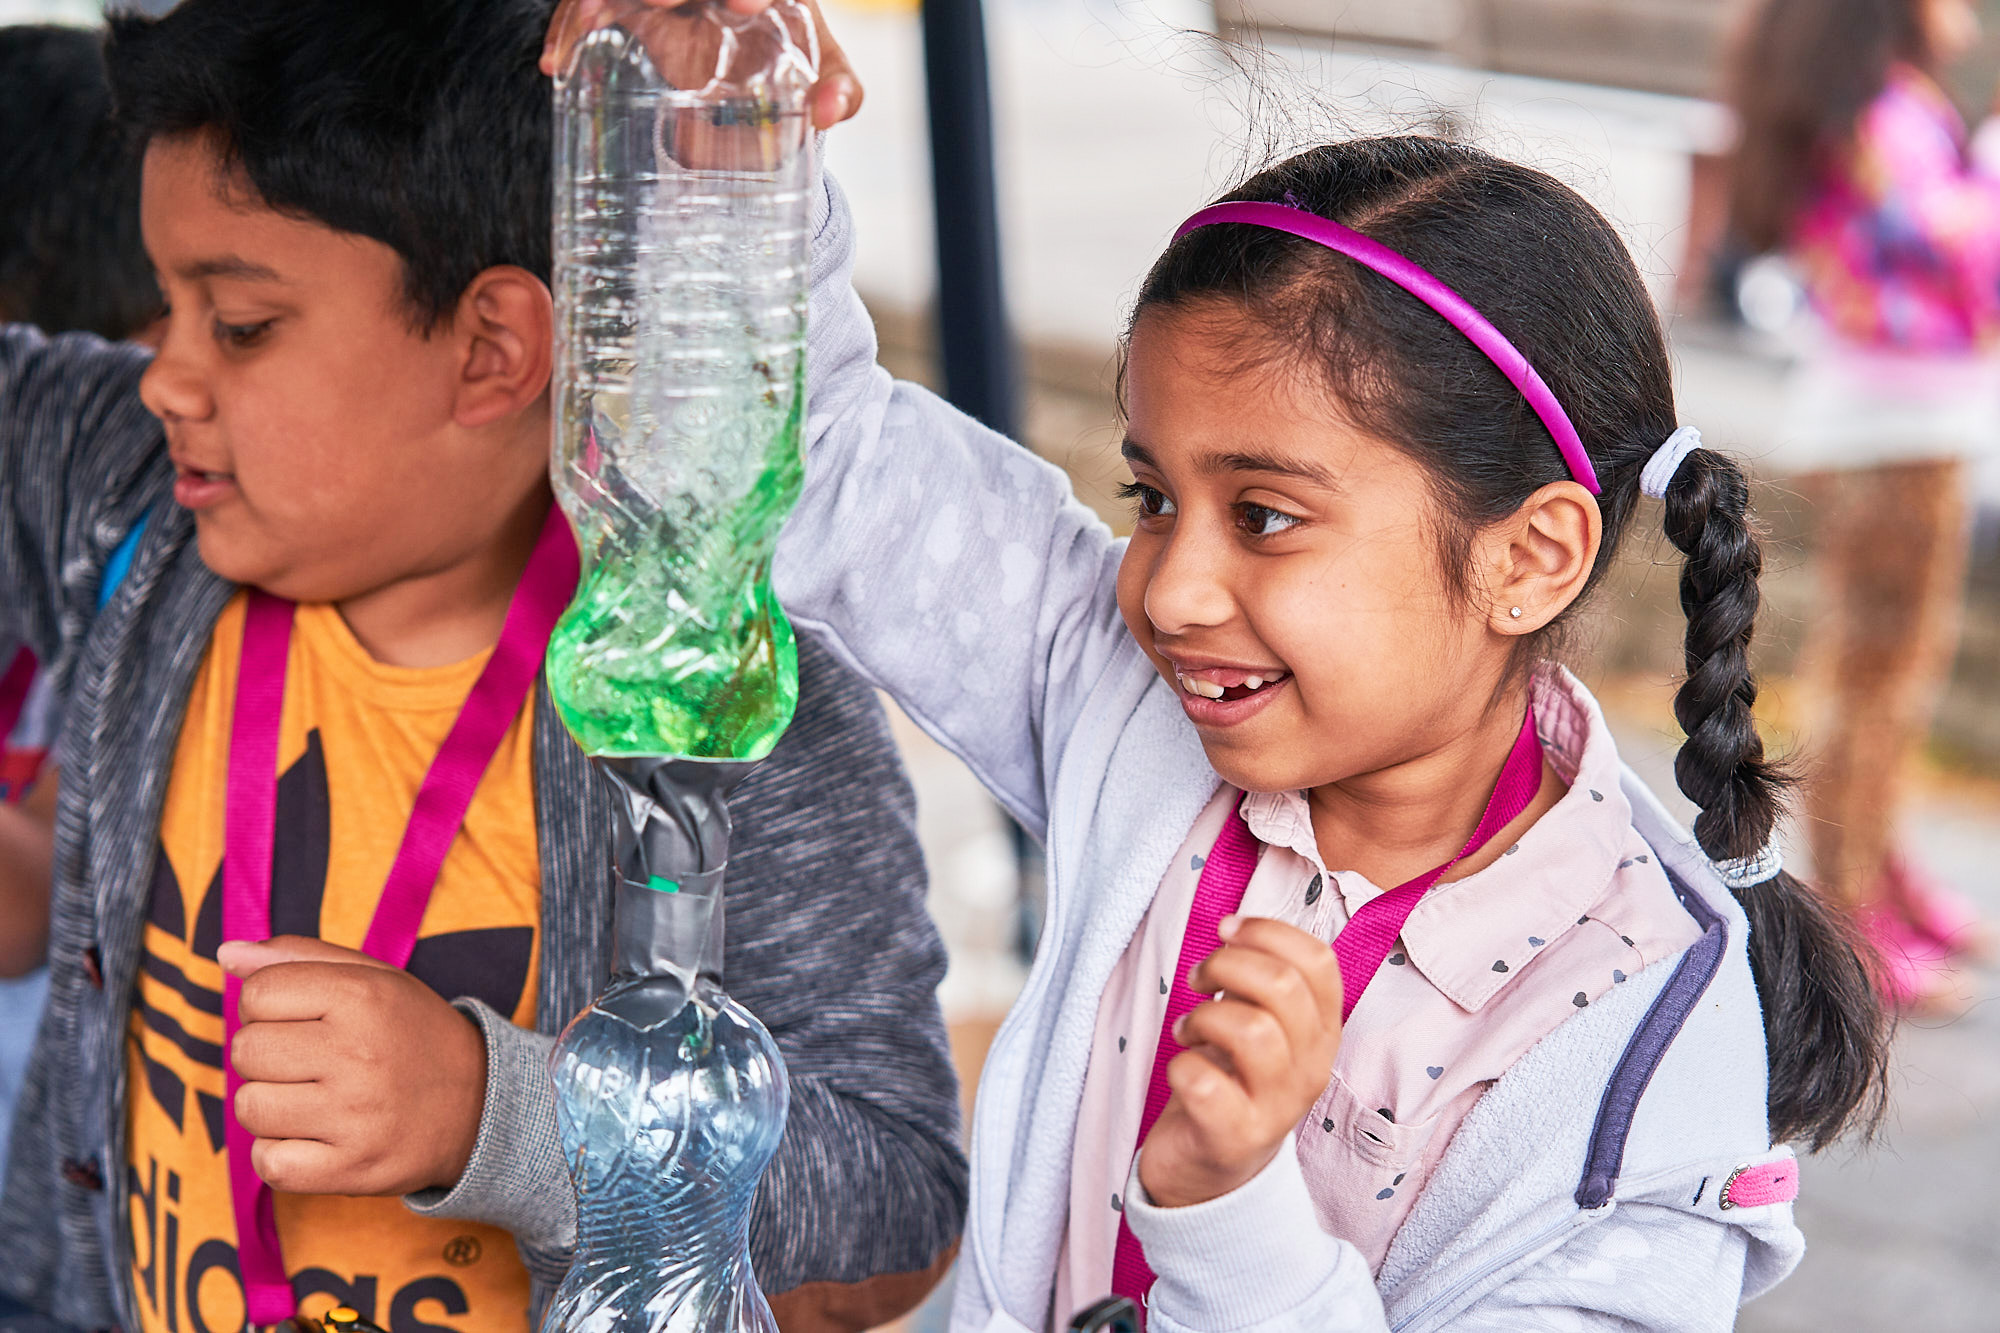 Two children taking part in a science activity using plastic bottles